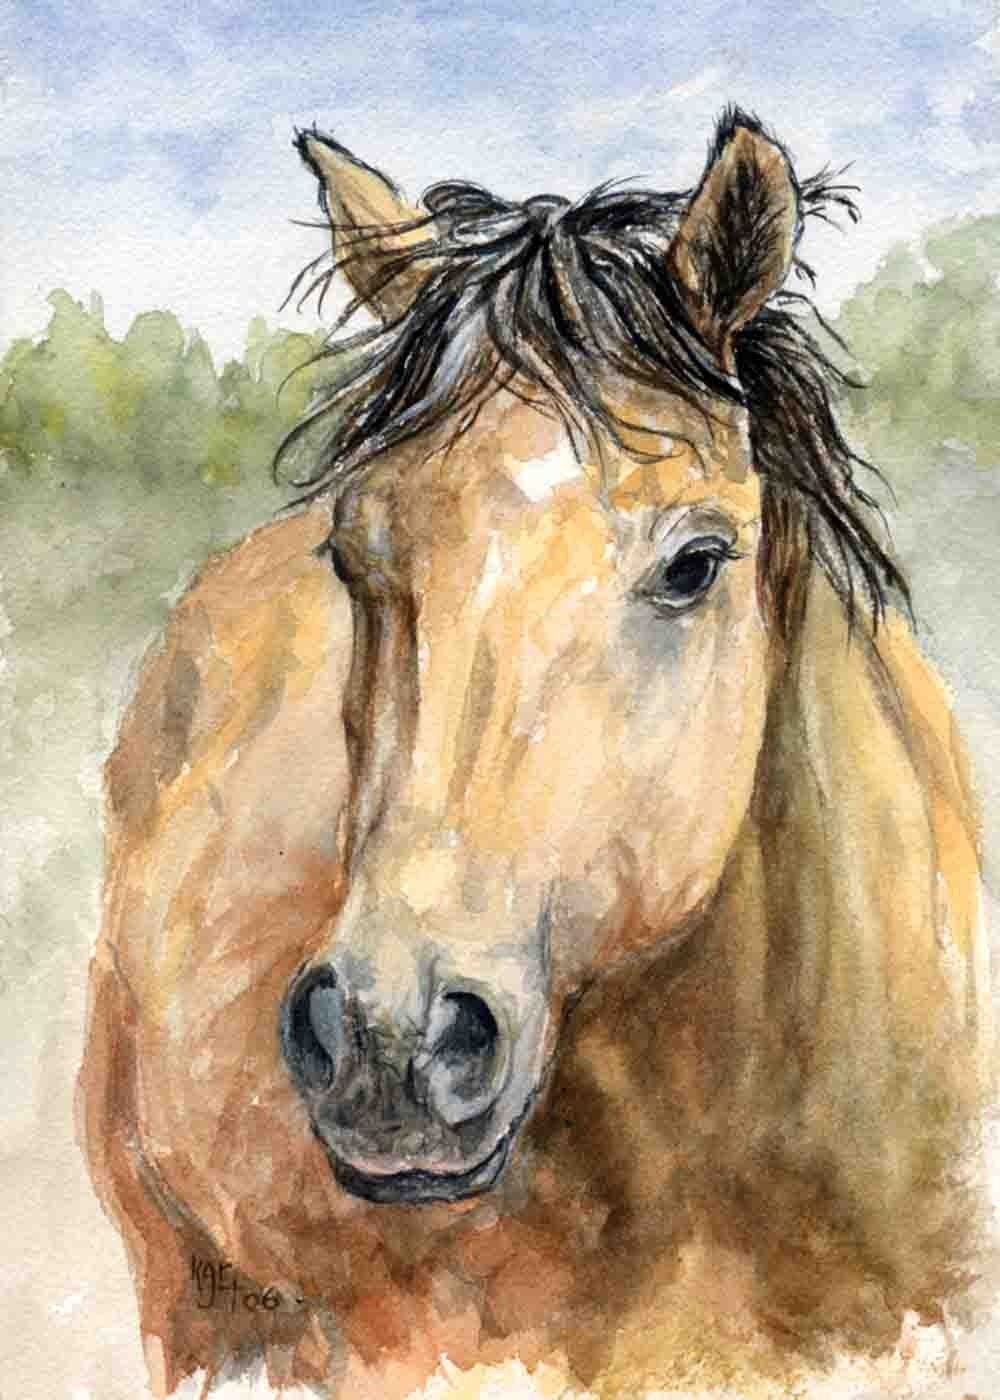 This pretty buckskin mare reminds me of Dale Evans horse - Buttermilk - Sugar is a 5 x 7 inch print of my original watercolor painting